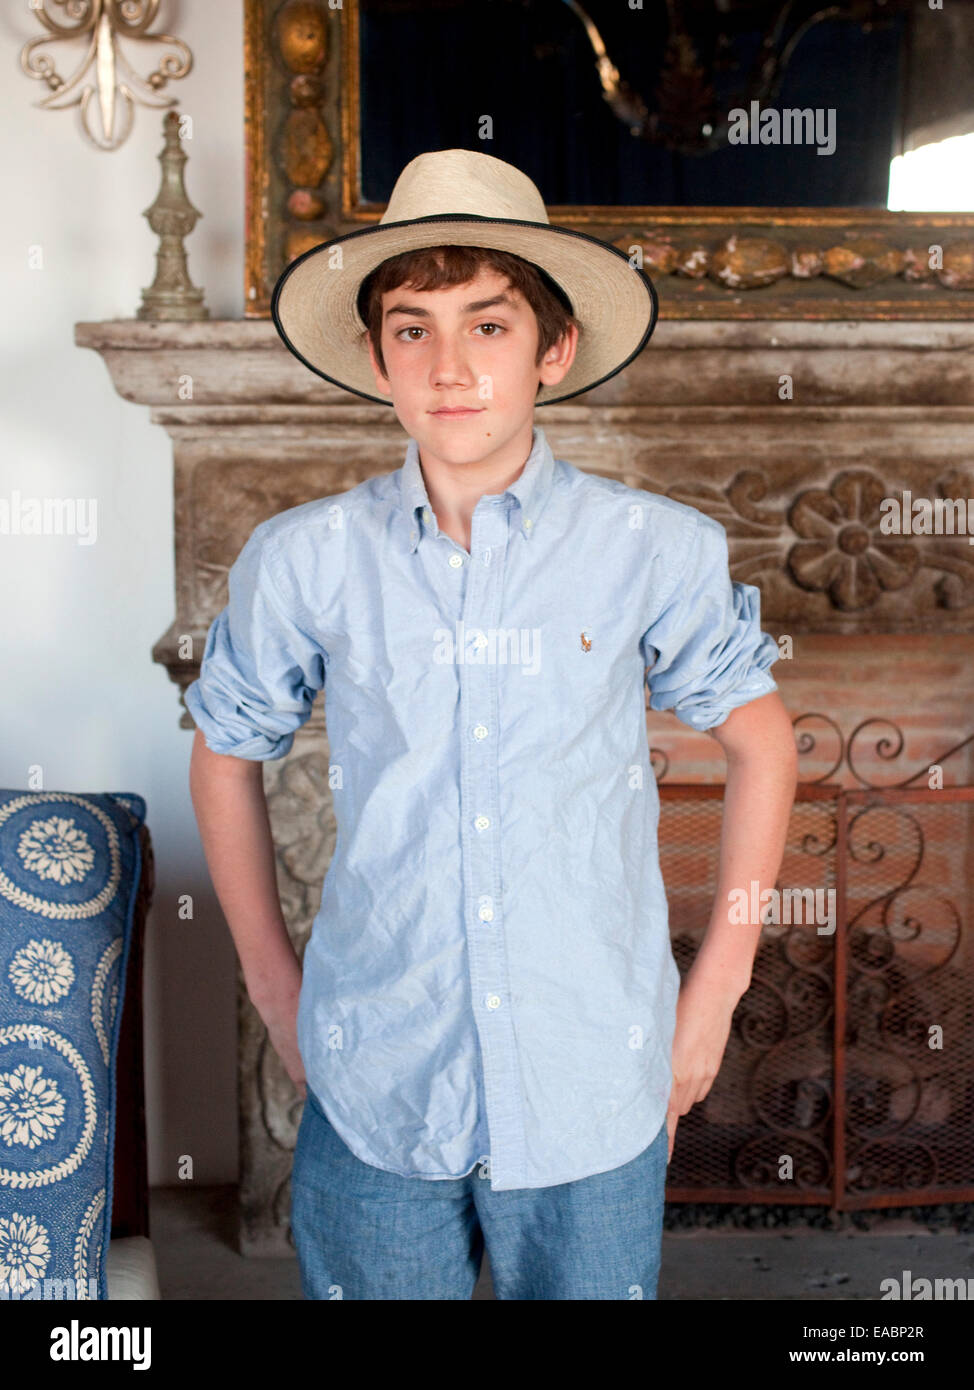 Portrait of Young boy wearing straw hat in Mexican style room with fireplace. Stock Photo